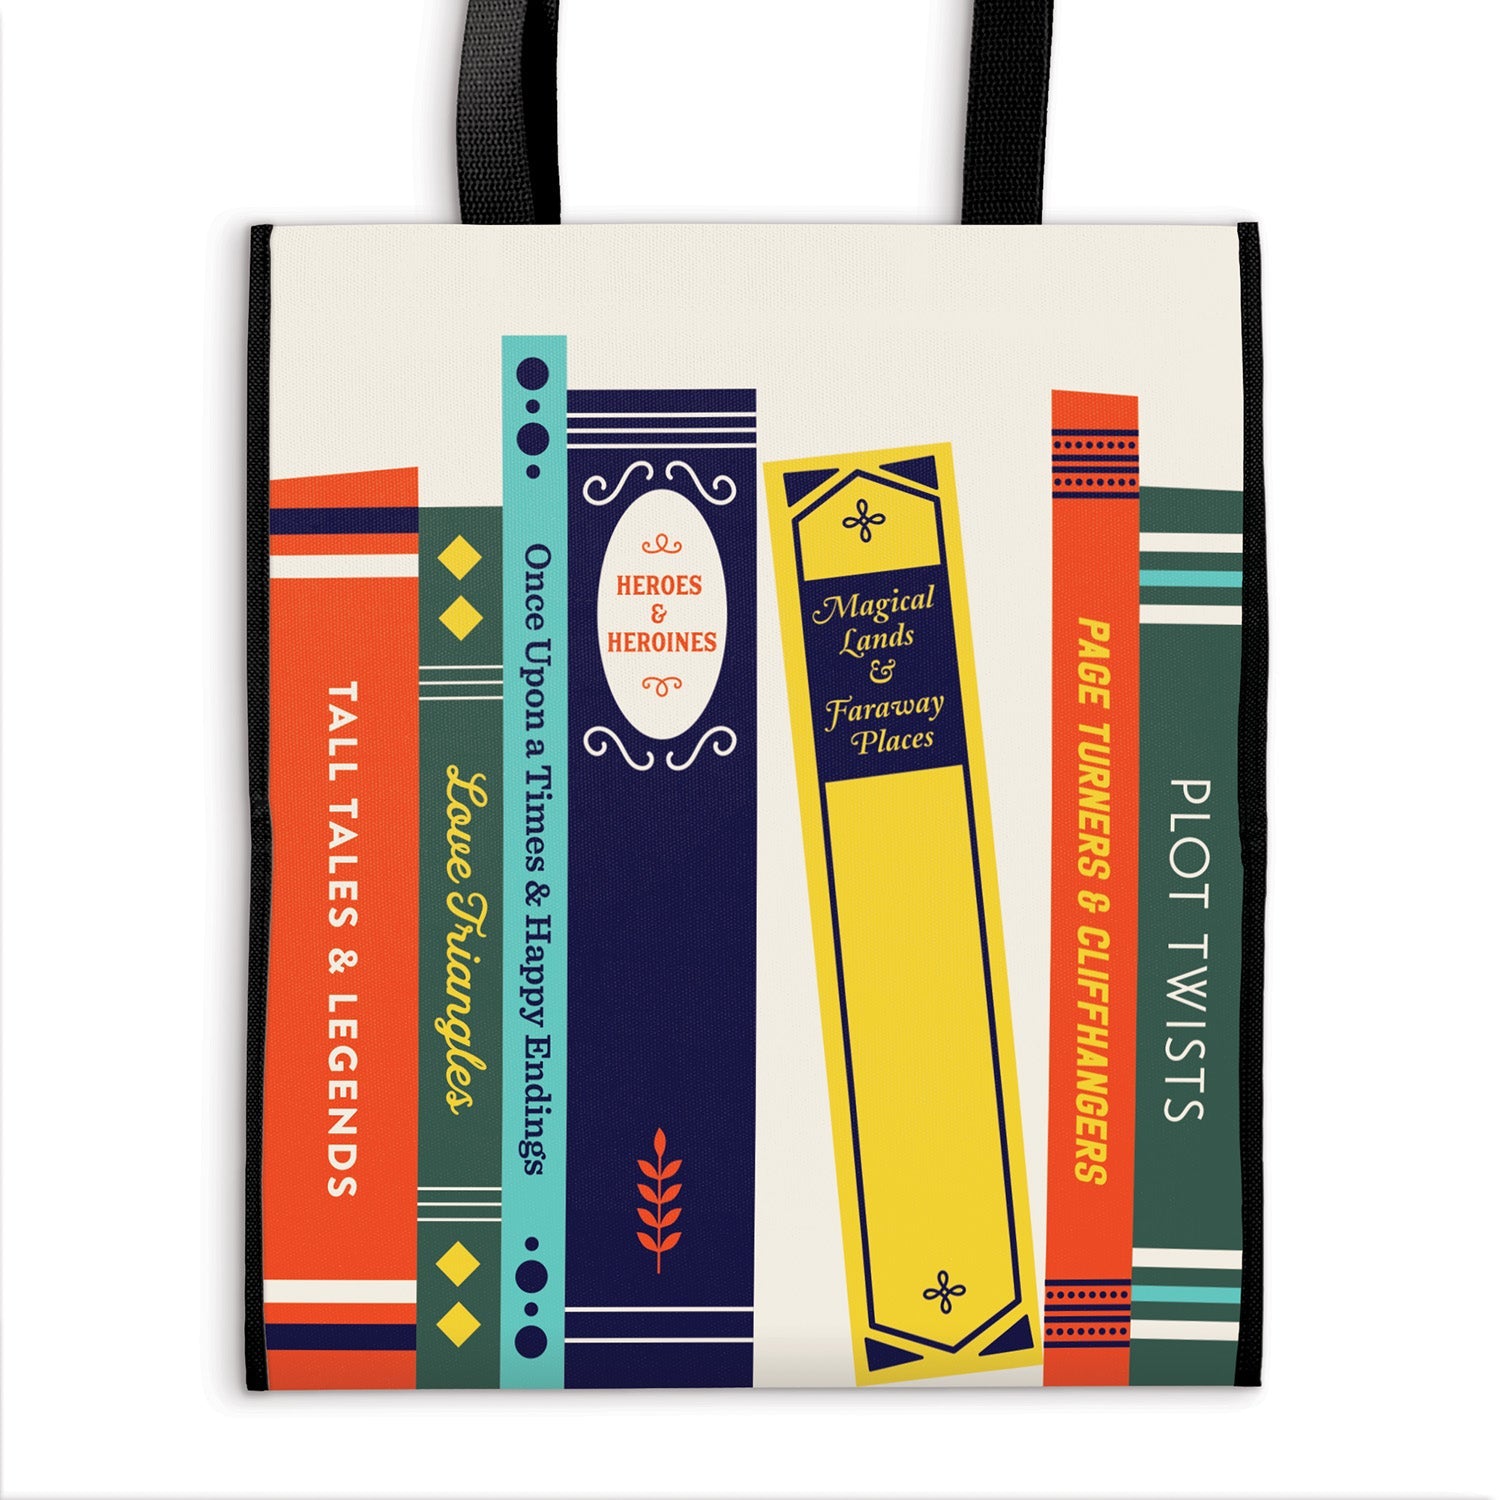 Super Replica Book Tote? It Takes Less Than One Second to Tell